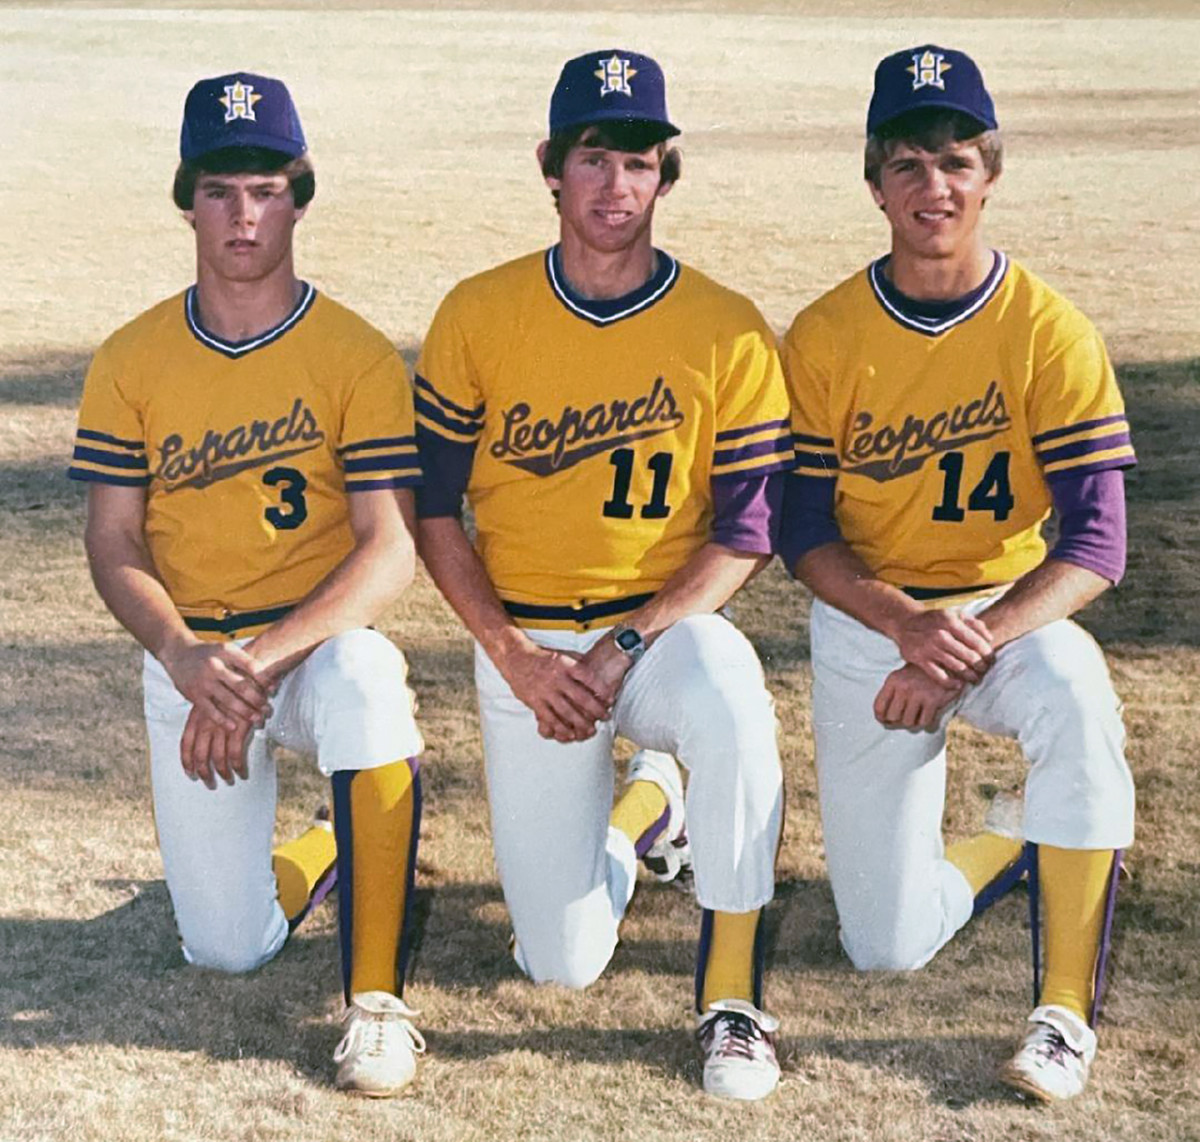 Tim Sims (left) began his long association with Hernando baseball as a player with the Leopards. In 1982, he is seen with former Hernando coach Ernie Chatman (center) and teammate Eddie Looper.